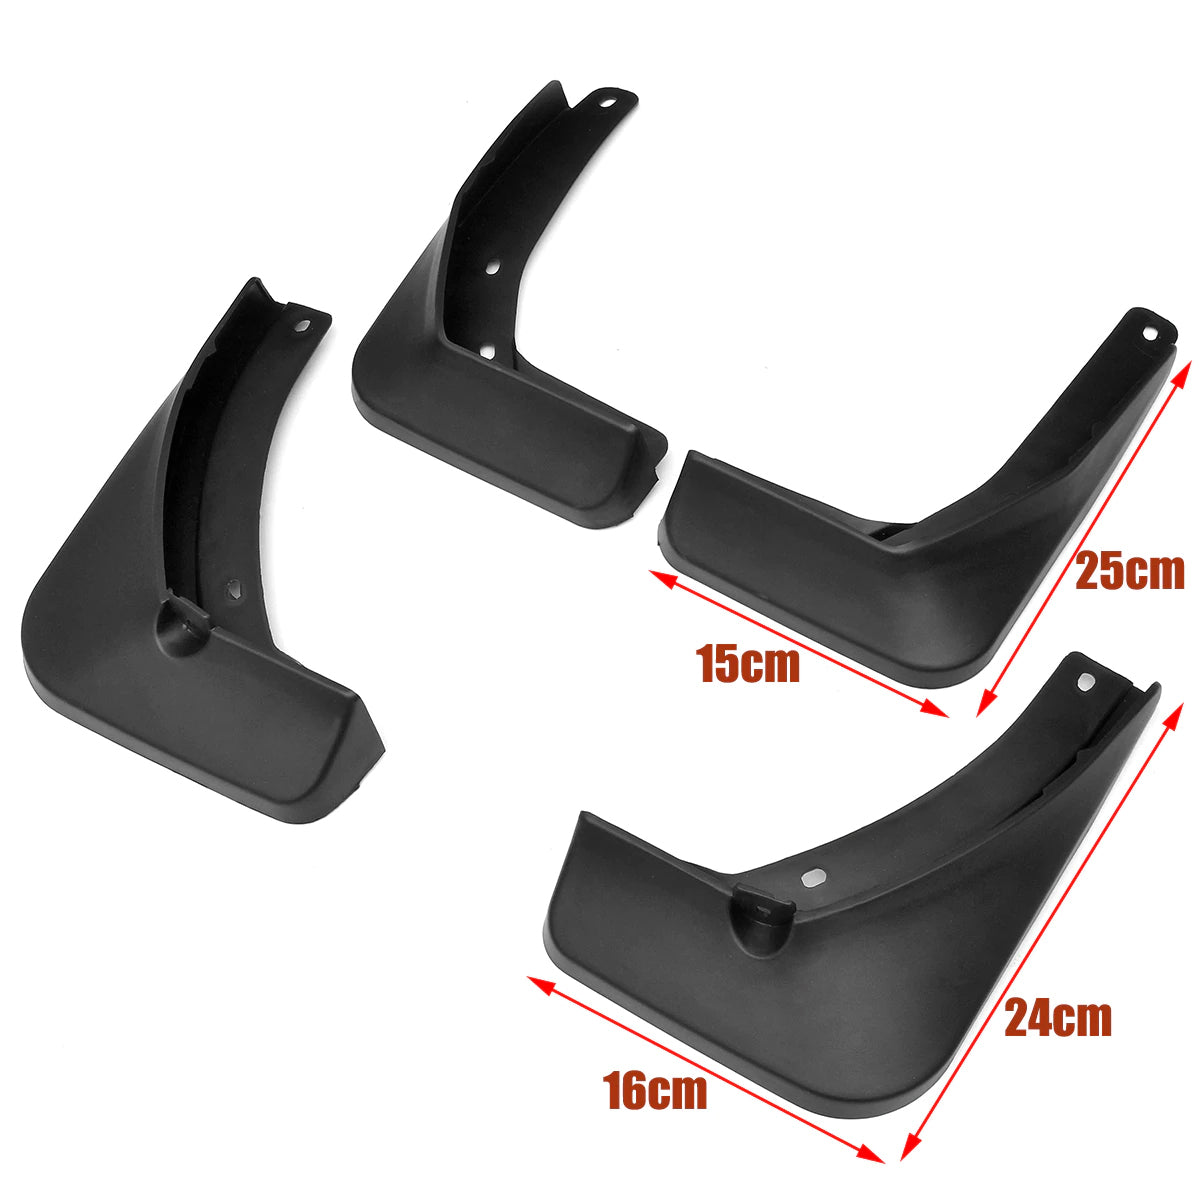 Oshotto Mud Flap (O.E.M Type) For Chevrolet Aveo (Set of 4)